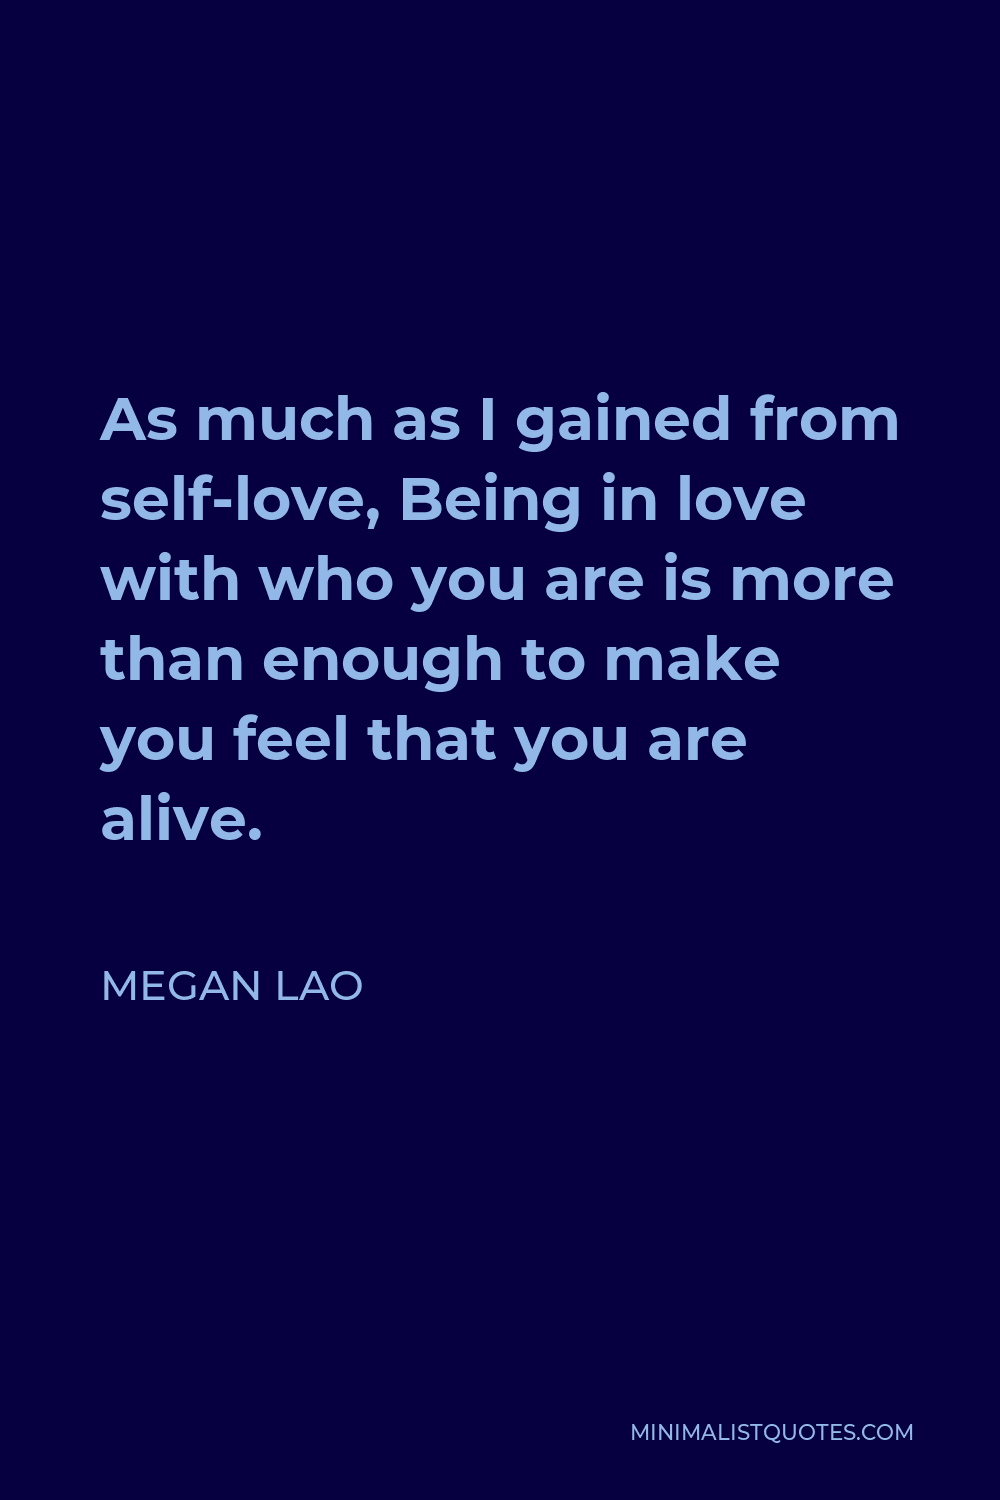 Megan Lao Quote - As much as I gained from self-love, Being in love with who you are is more than enough to make you feel that you are alive.